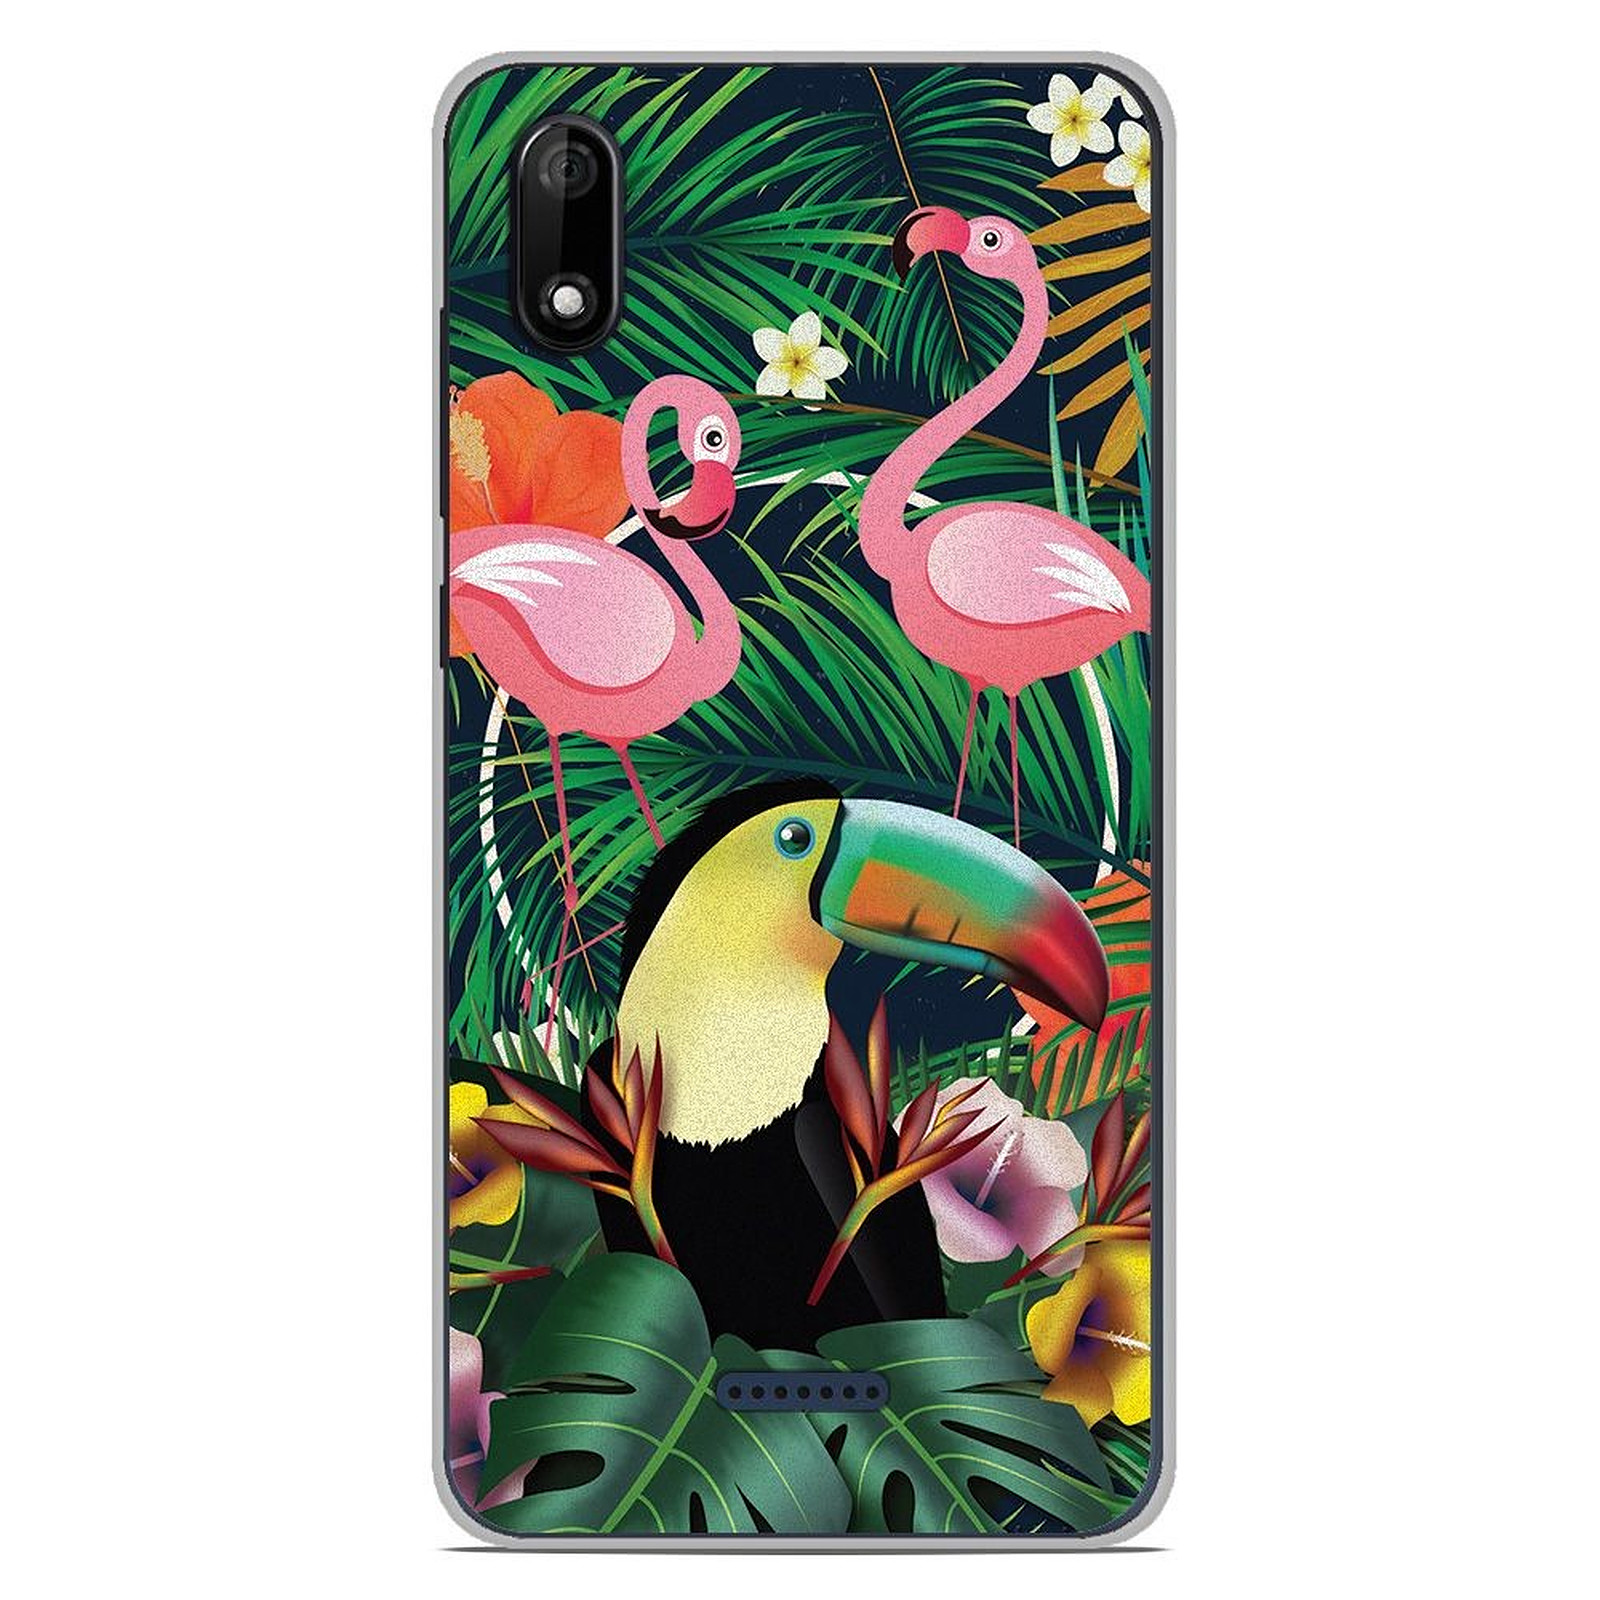 1001 Coques Coque silicone gel Wiko Y50 motif Tropical Toucan - Coque telephone 1001Coques